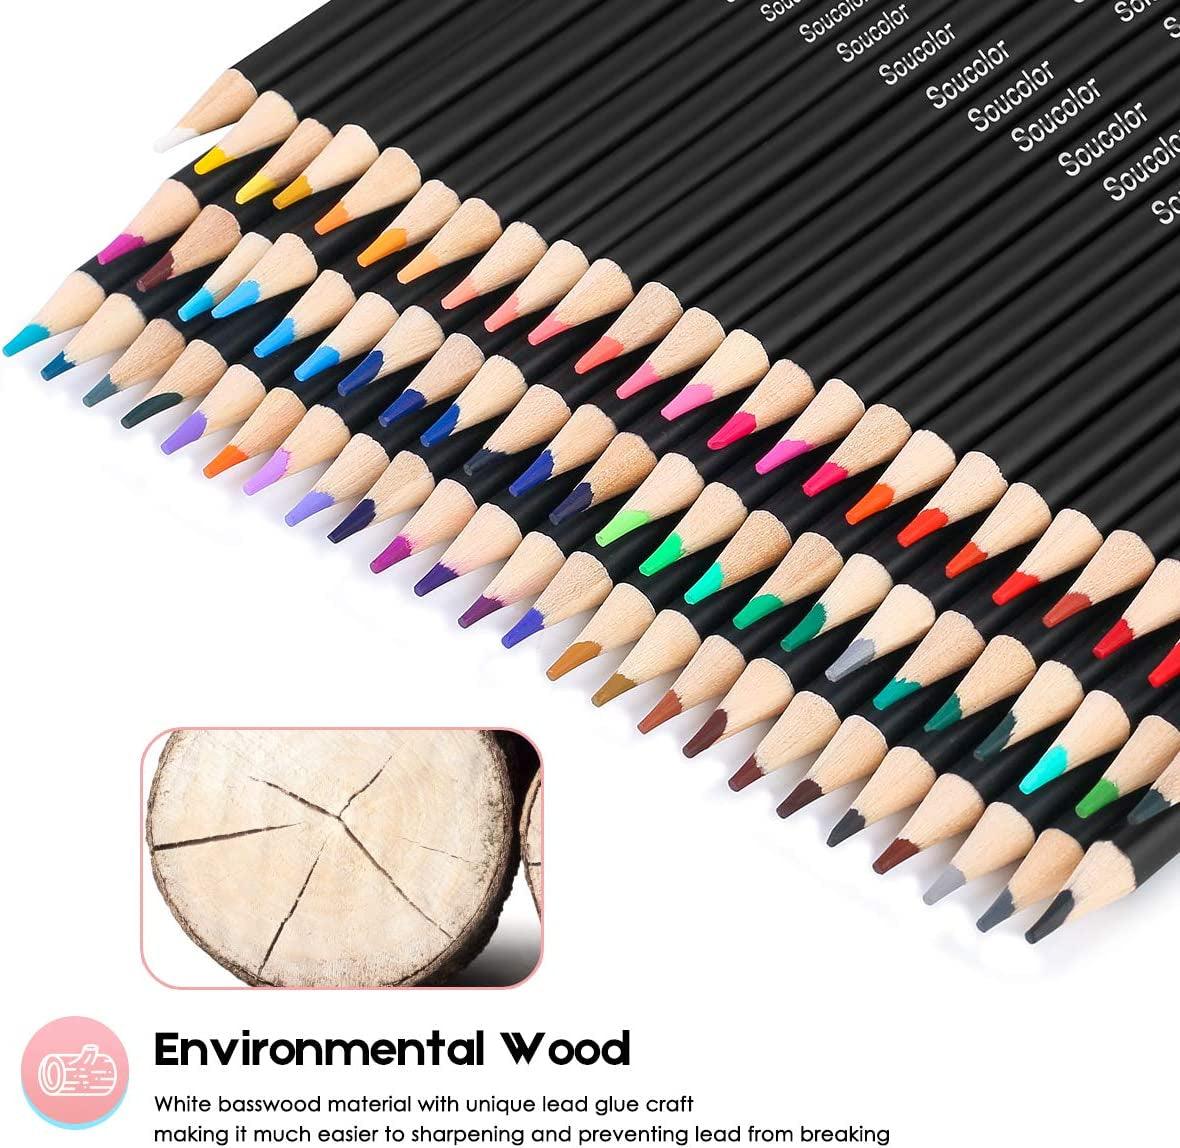  Drawdart Colored Pencils for Adult Coloring, 72-Color  Professional Soft Core Drawing Sketching Shading Pencils Set with Zipper  Case, Coloring Pencils for Adults, Artists, Professionals and Colorists :  Arts, Crafts 